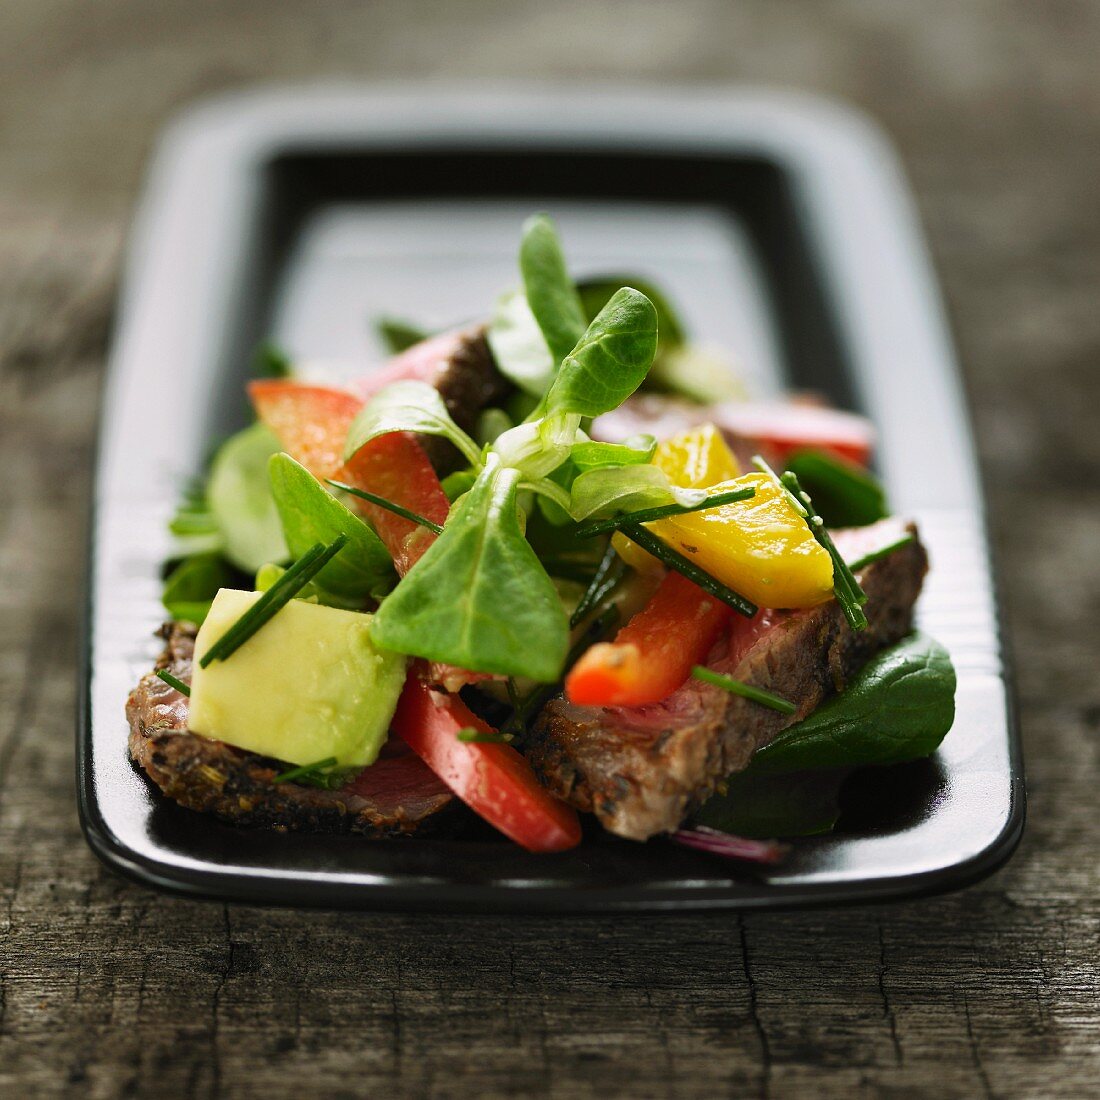 Lamb's lettuce with avocado, peppers and beef